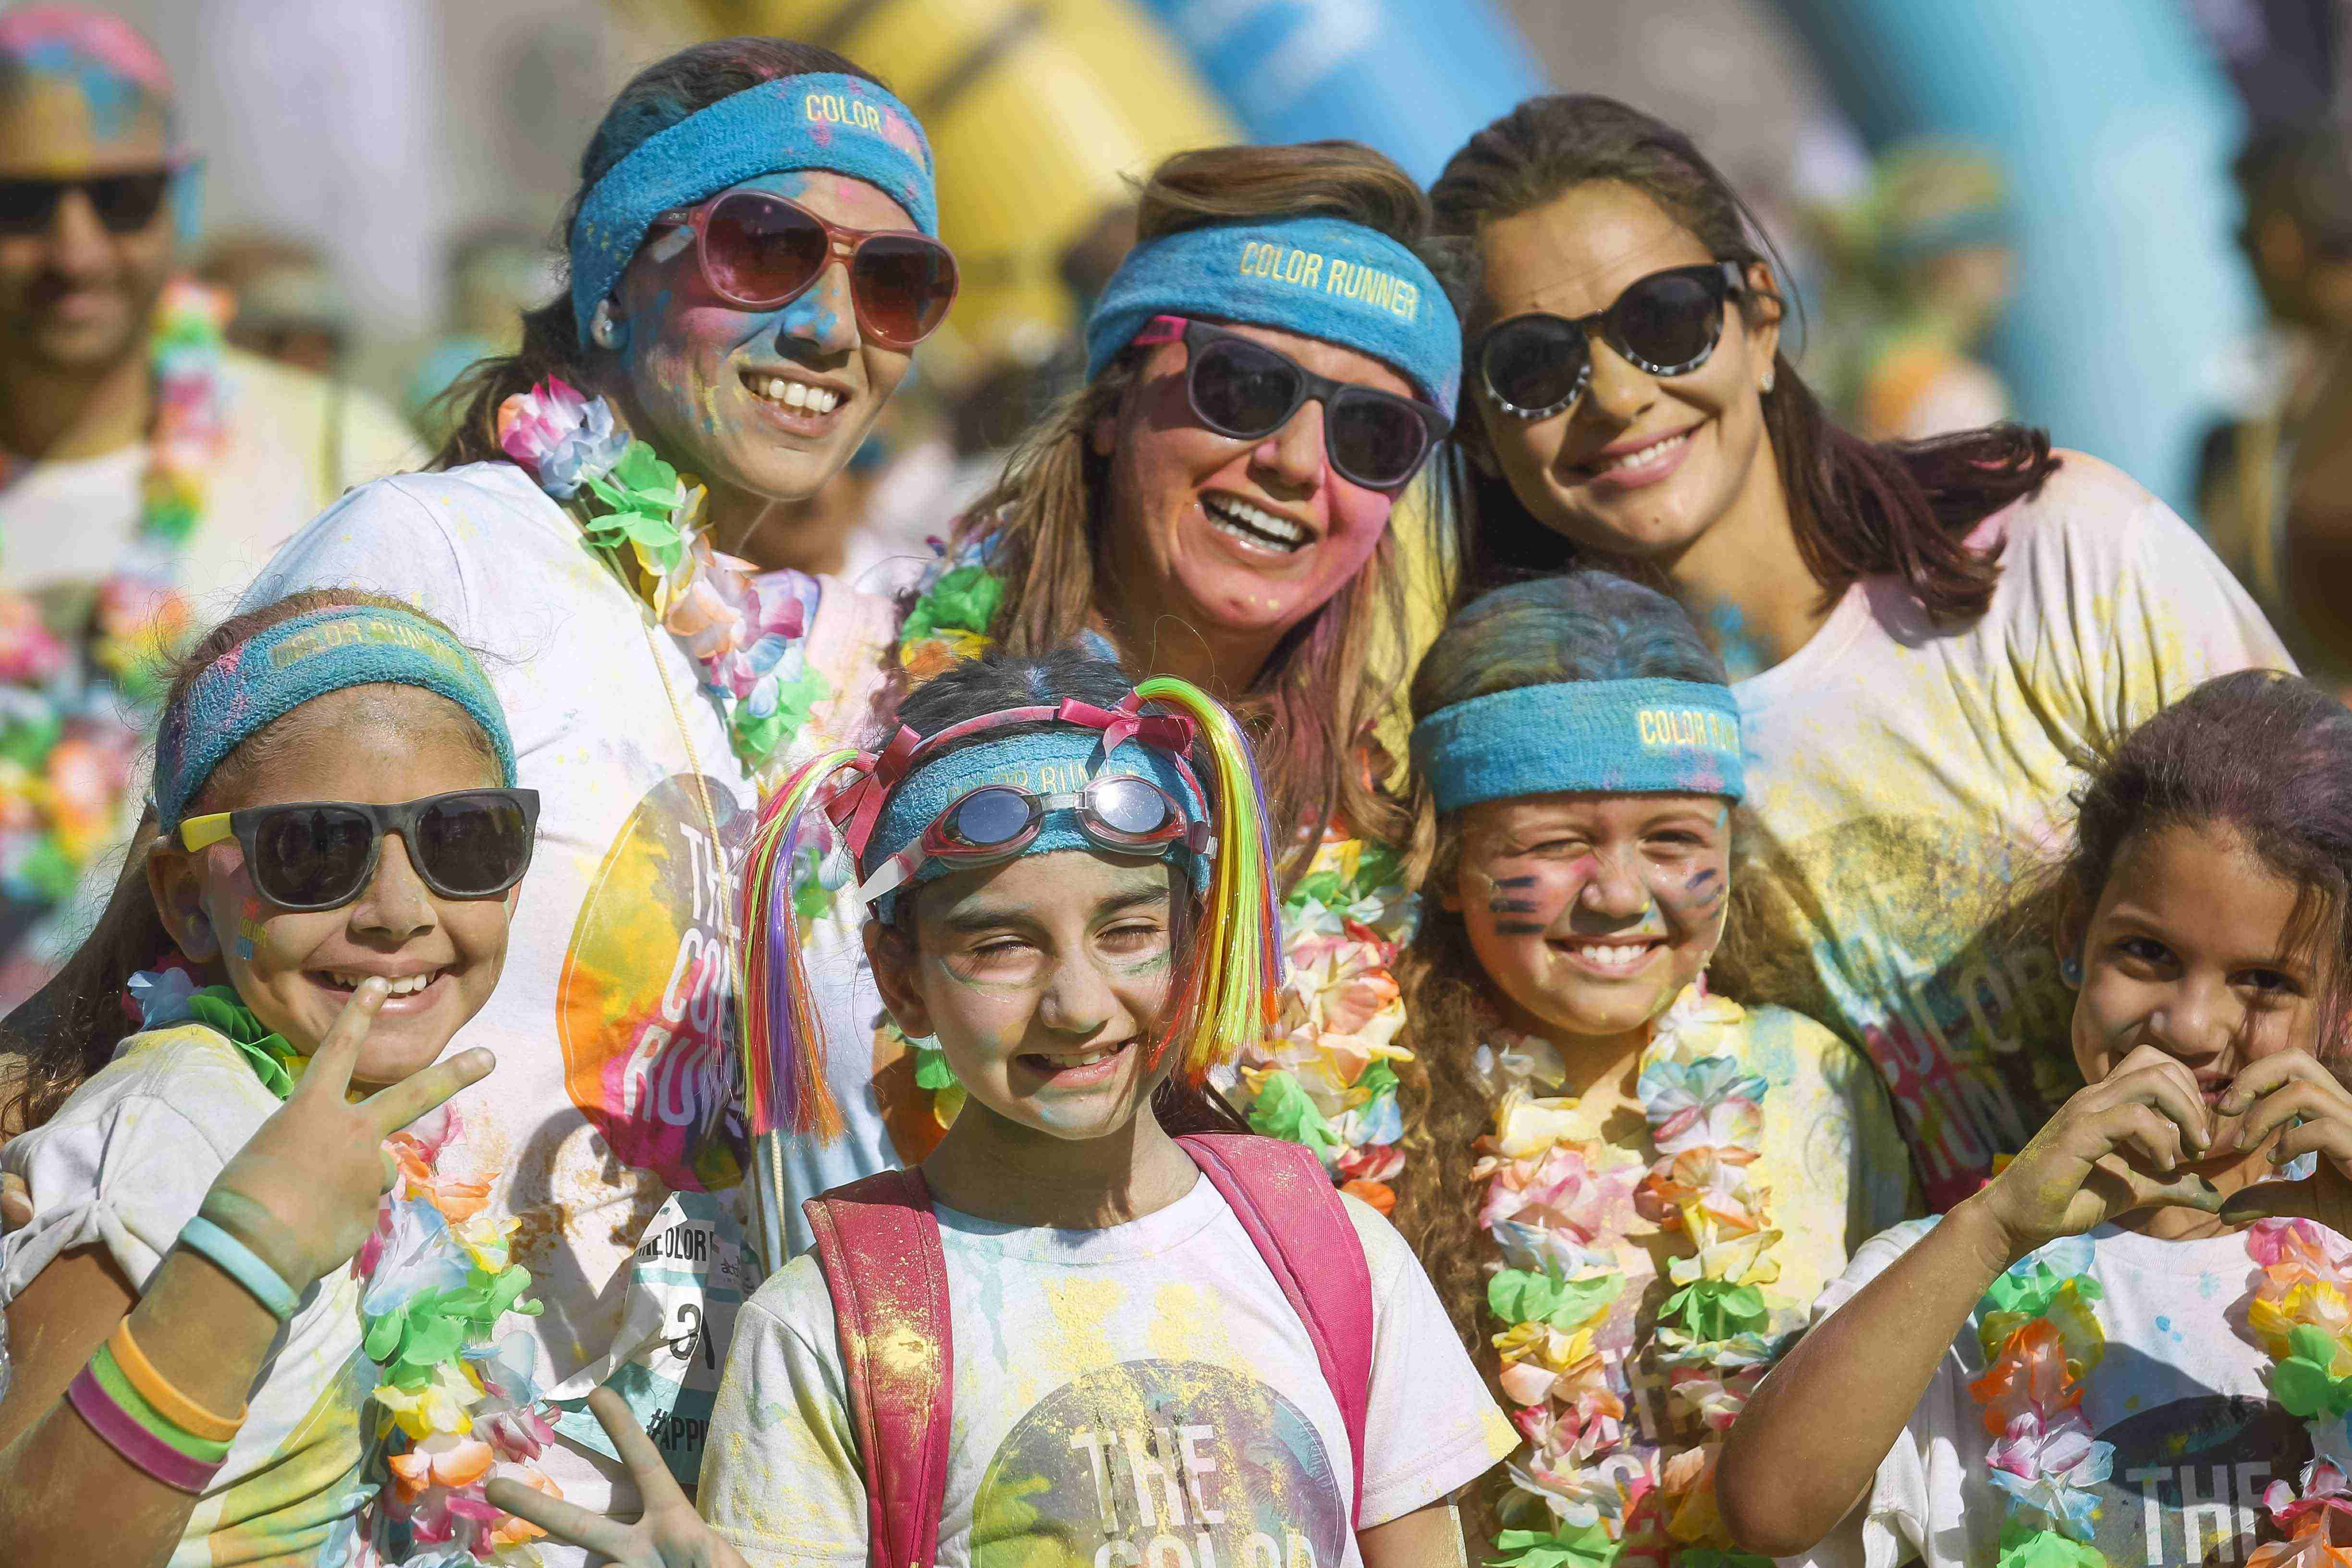 the-color-run-presented-by-damans-activelife-offers-an-exciting-day-out-for-families-and-friends